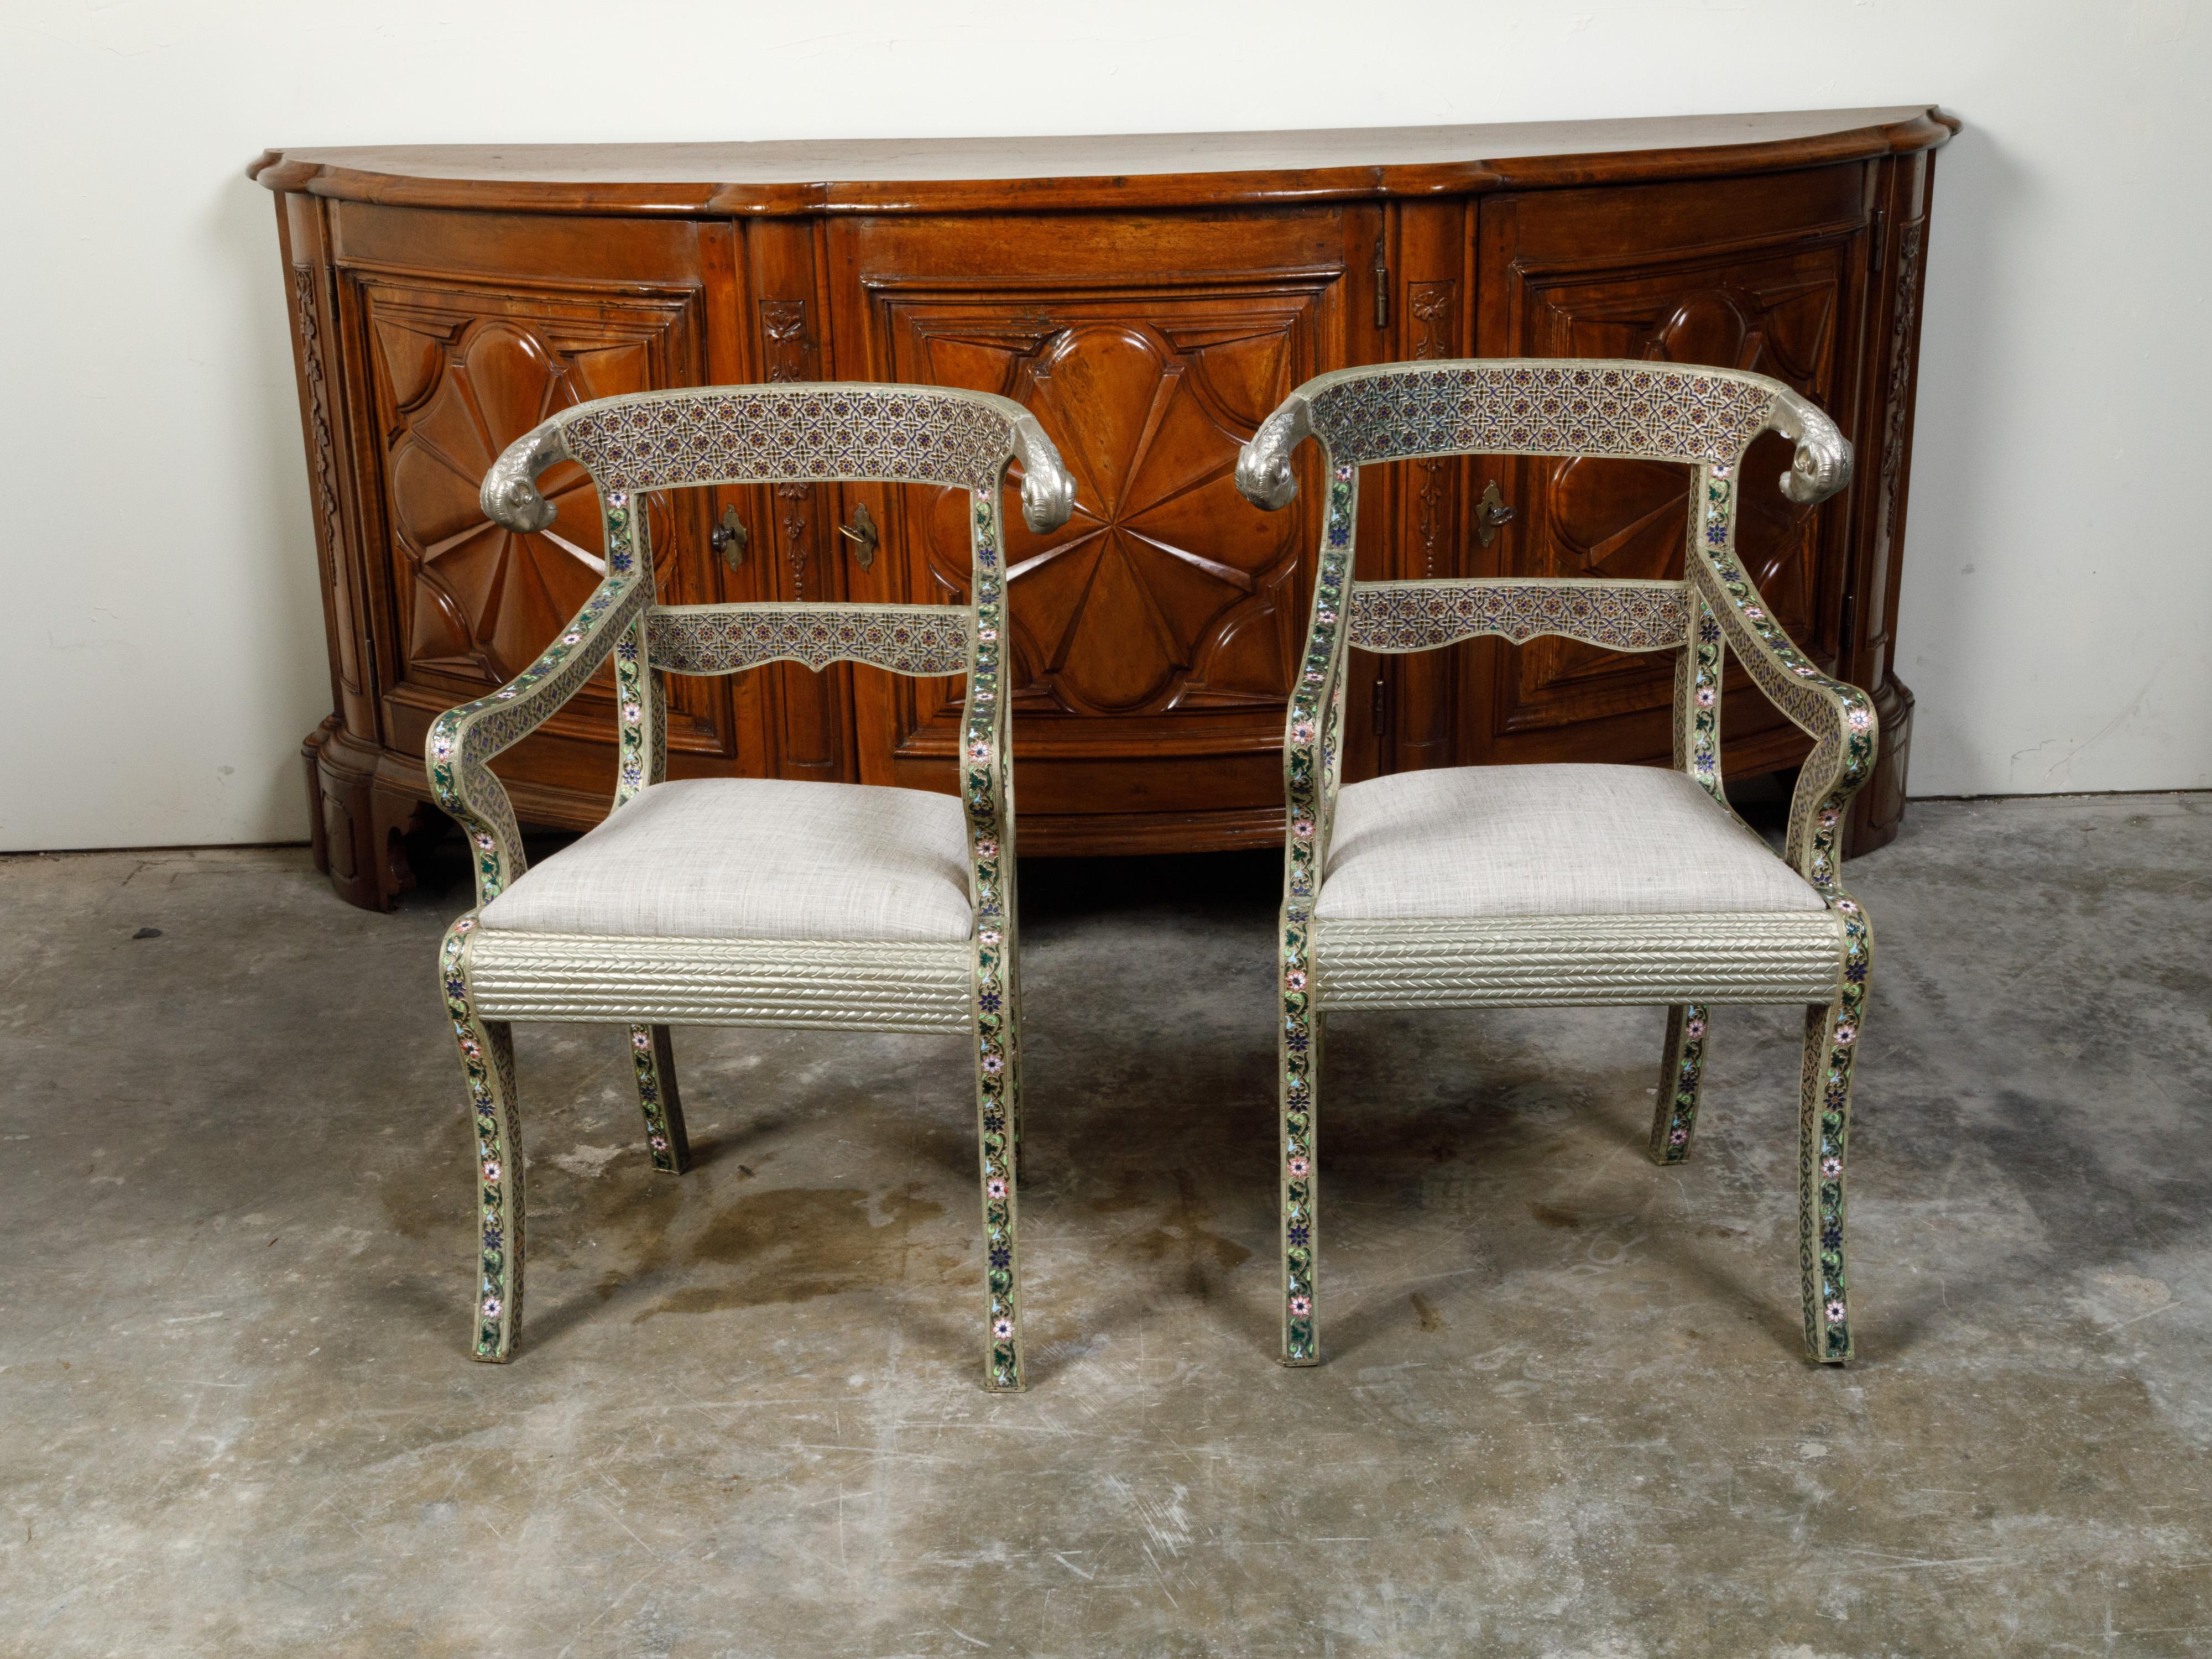 A pair of Moroccan metal armchairs from the mid 20th century, with enamel décor and rams' heads. Created in Morocco during the second quarter of the 20th century, each of this pair of armchairs features a pierced back with curving rail and rams'